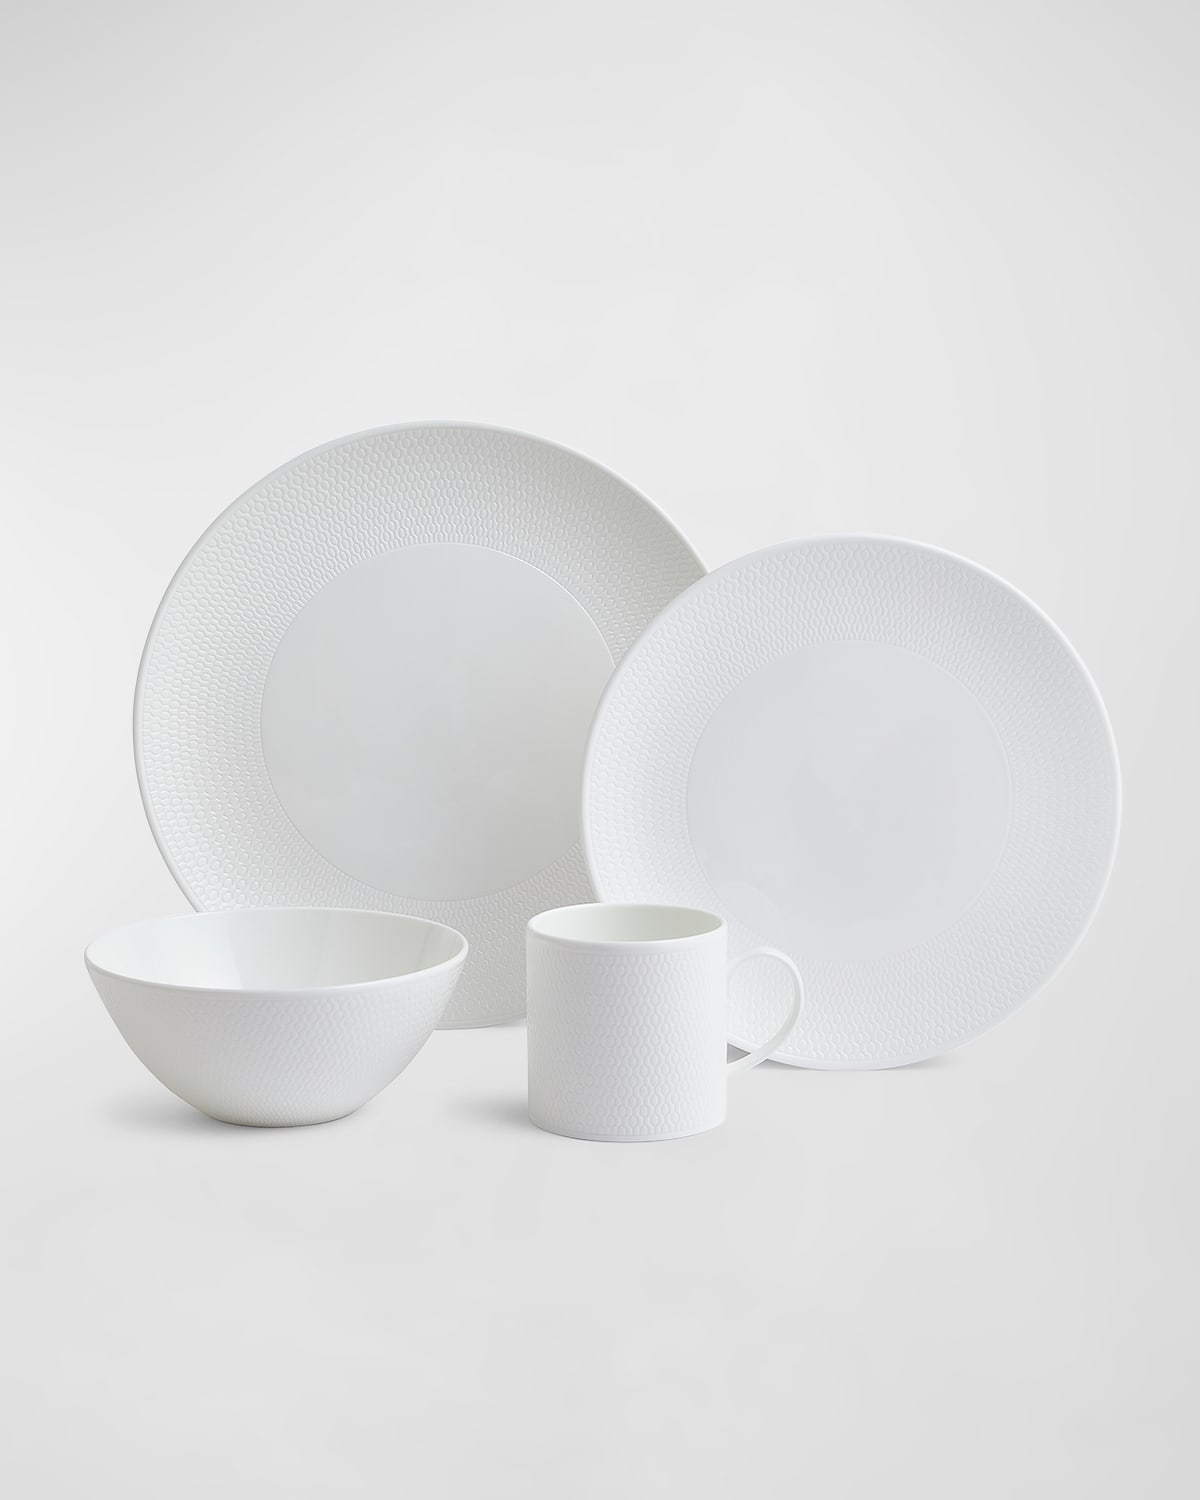 Gio 4-Piece Place Setting